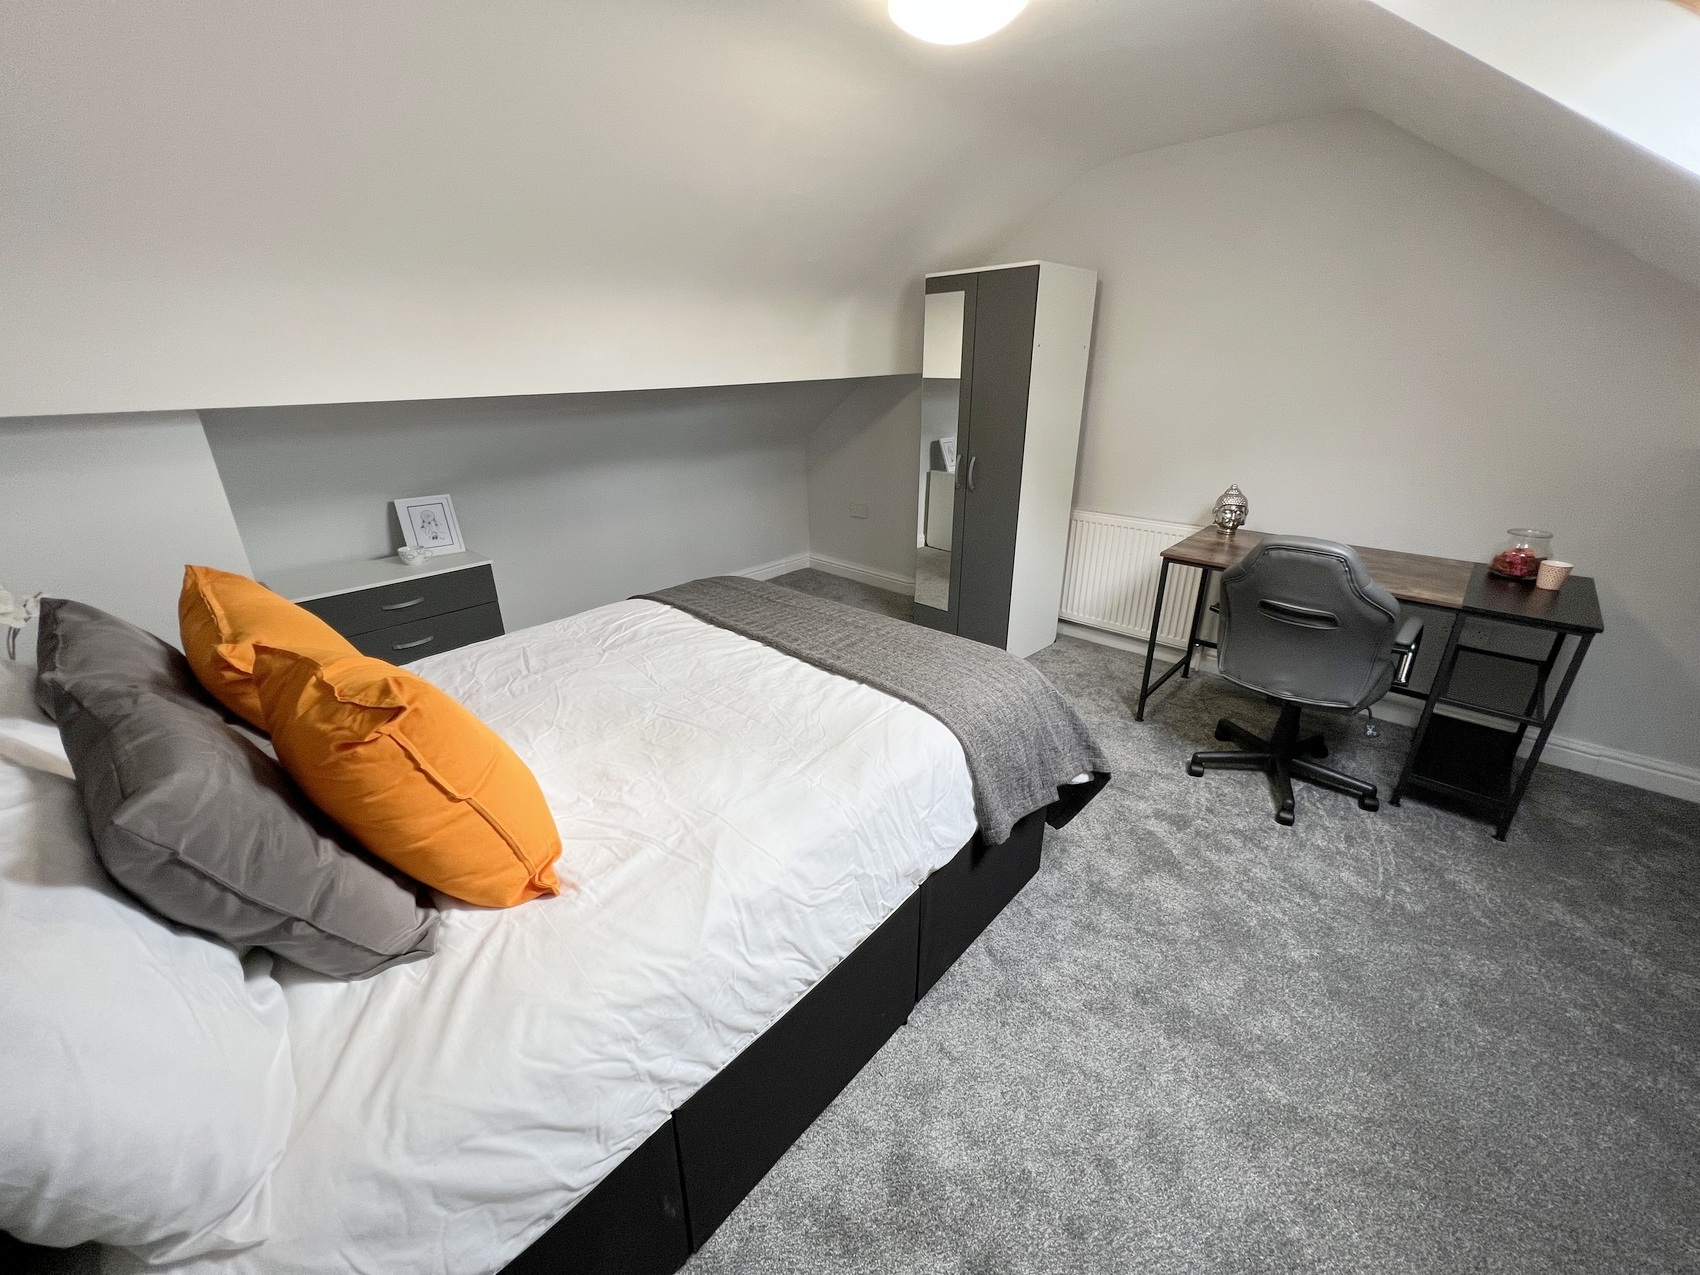 Luxurious Brand NEW Rooms Near Moseley Village! – Room 6